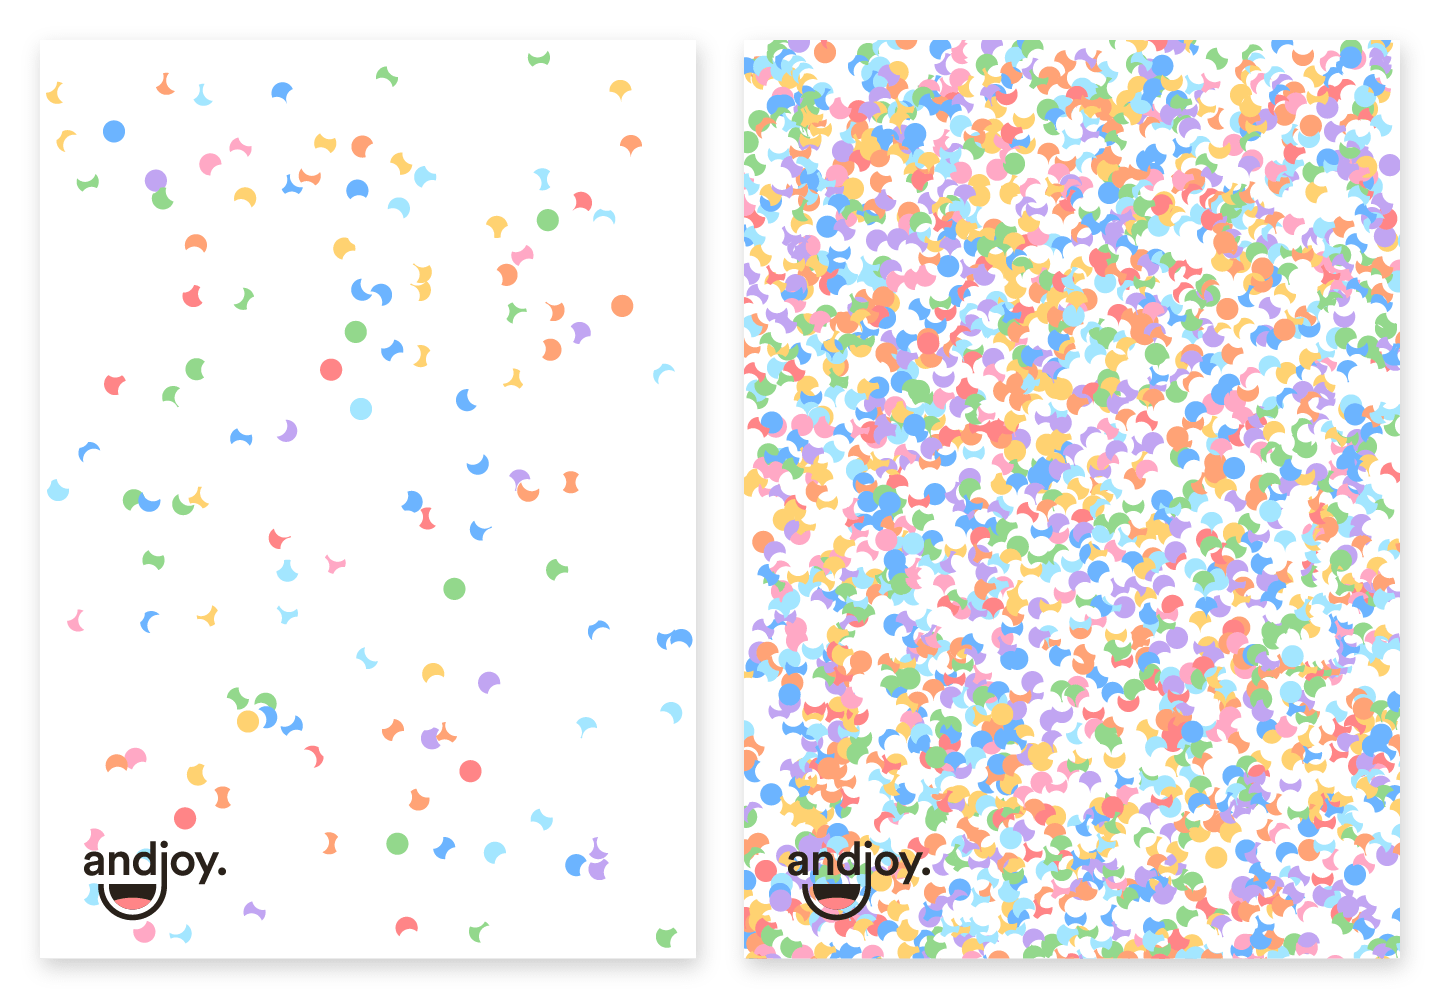 Two posters composed with various confetti shapes and colors